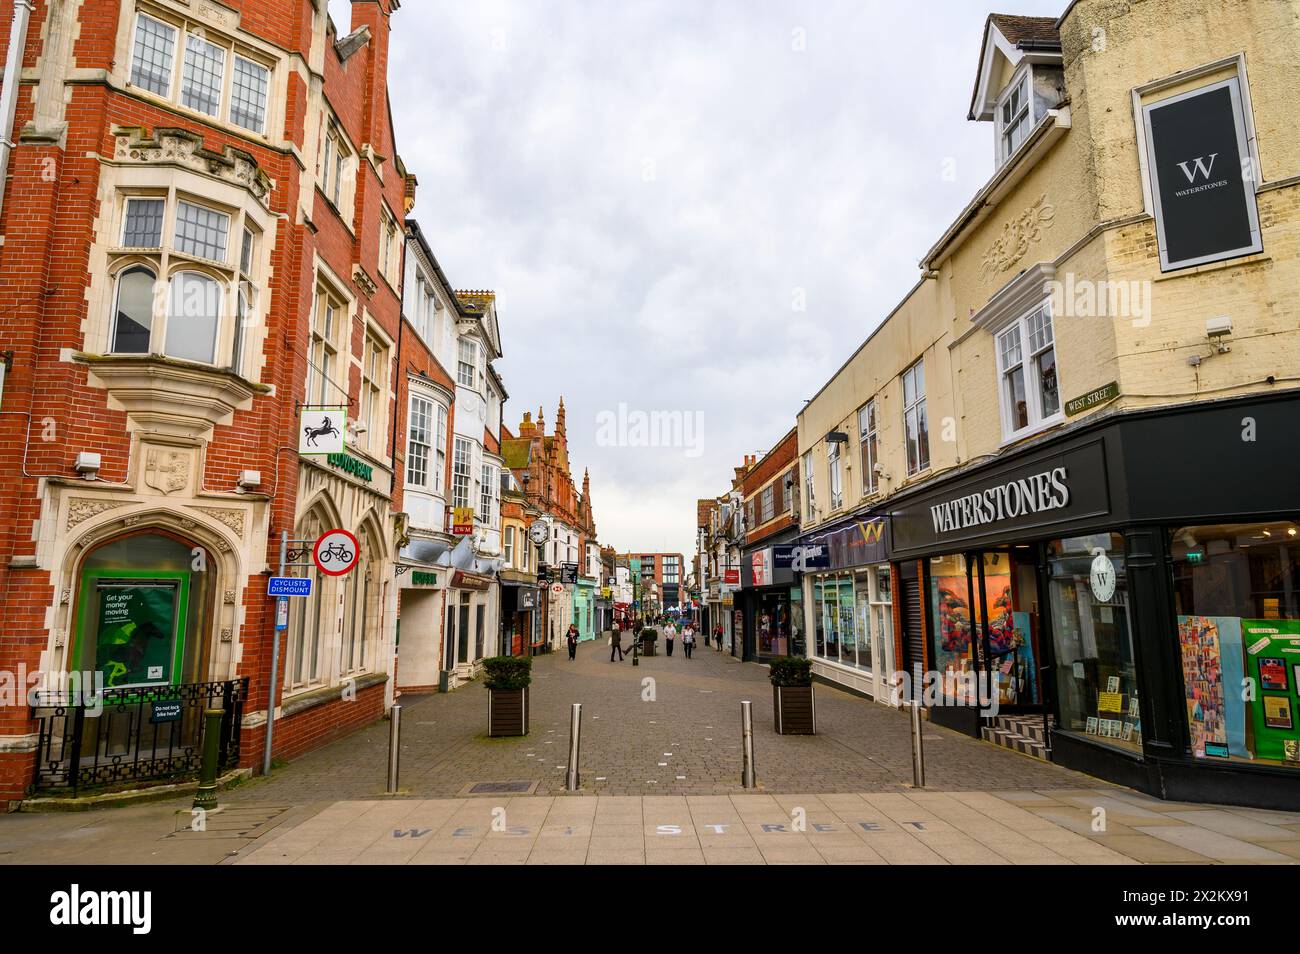 West Street is a pedestrianised shopping street in the old market town of Horsham in West Sussex, England Stock Photo